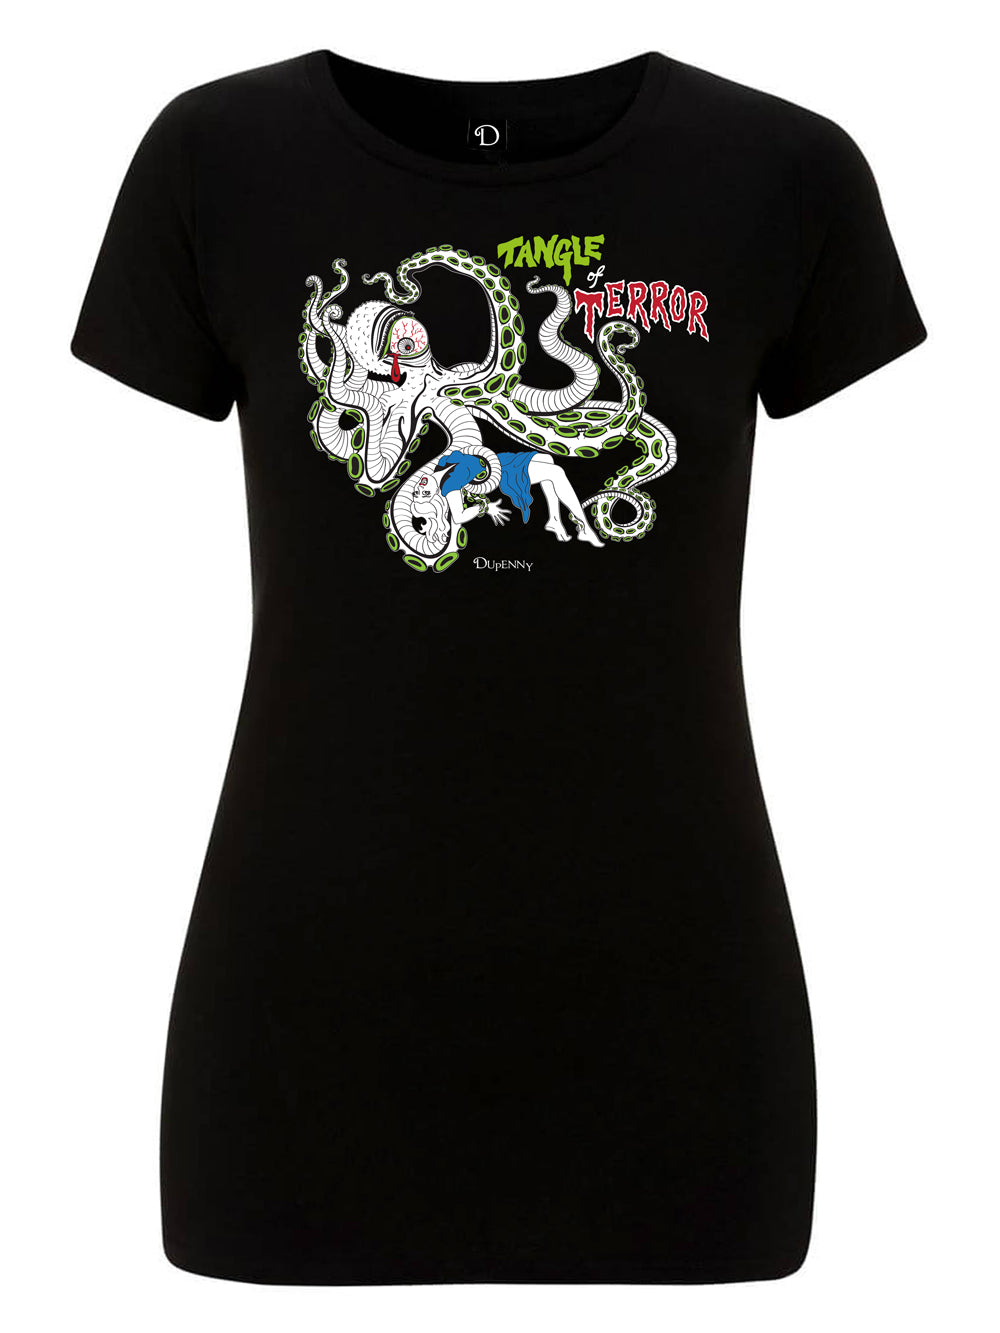 Dupenny Horror series Tangle of Terror B-Movie T-shirt